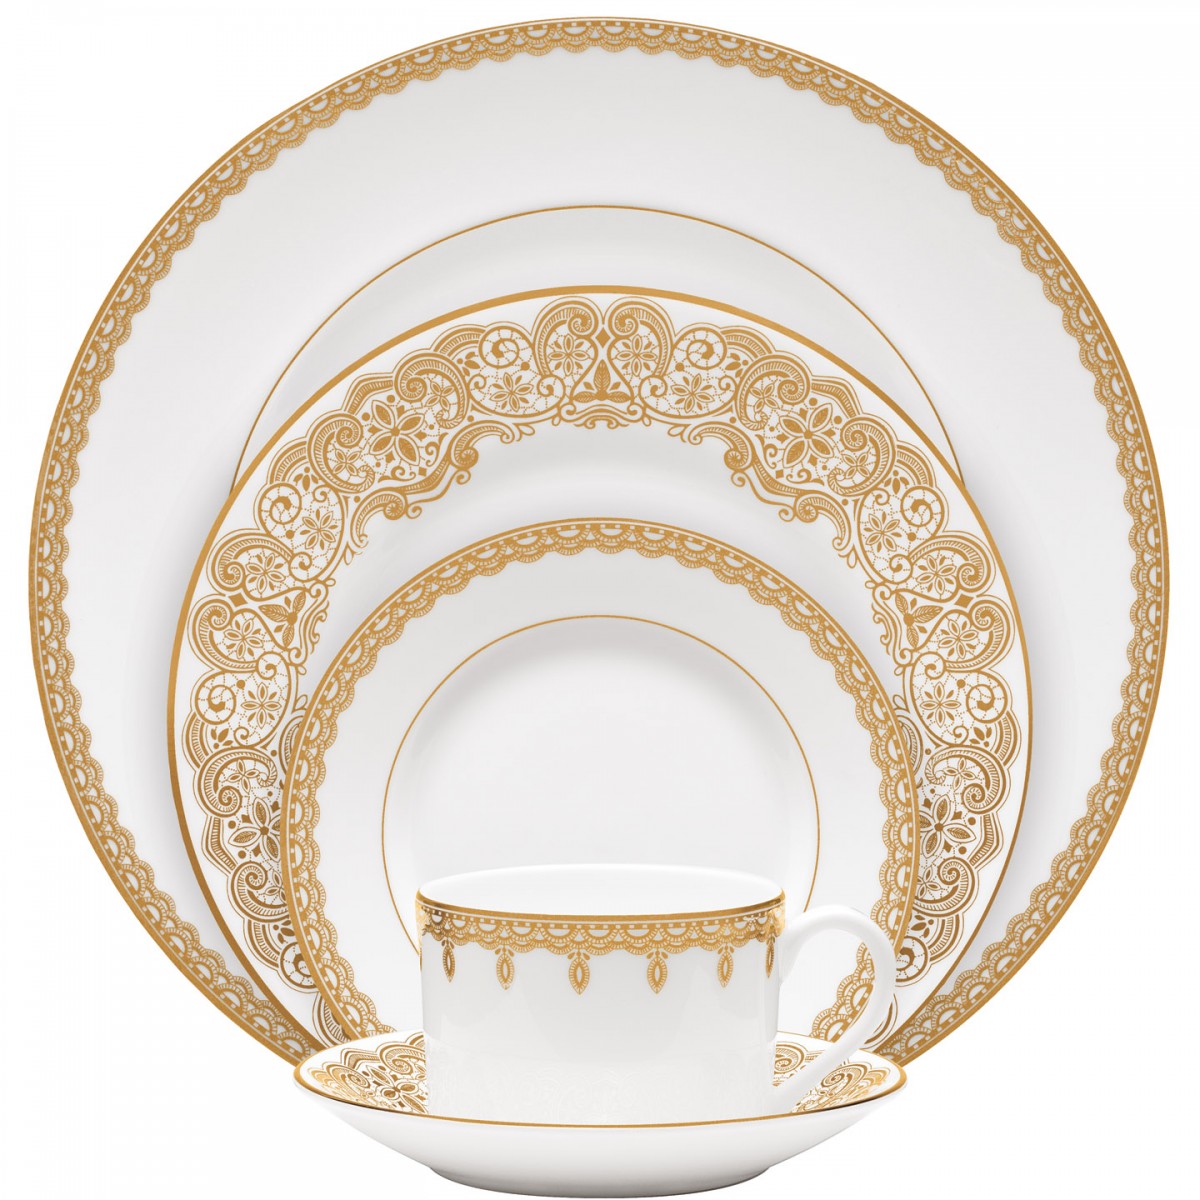 waterford-lismore-lace-gold-5-piece-place-setting.jpg